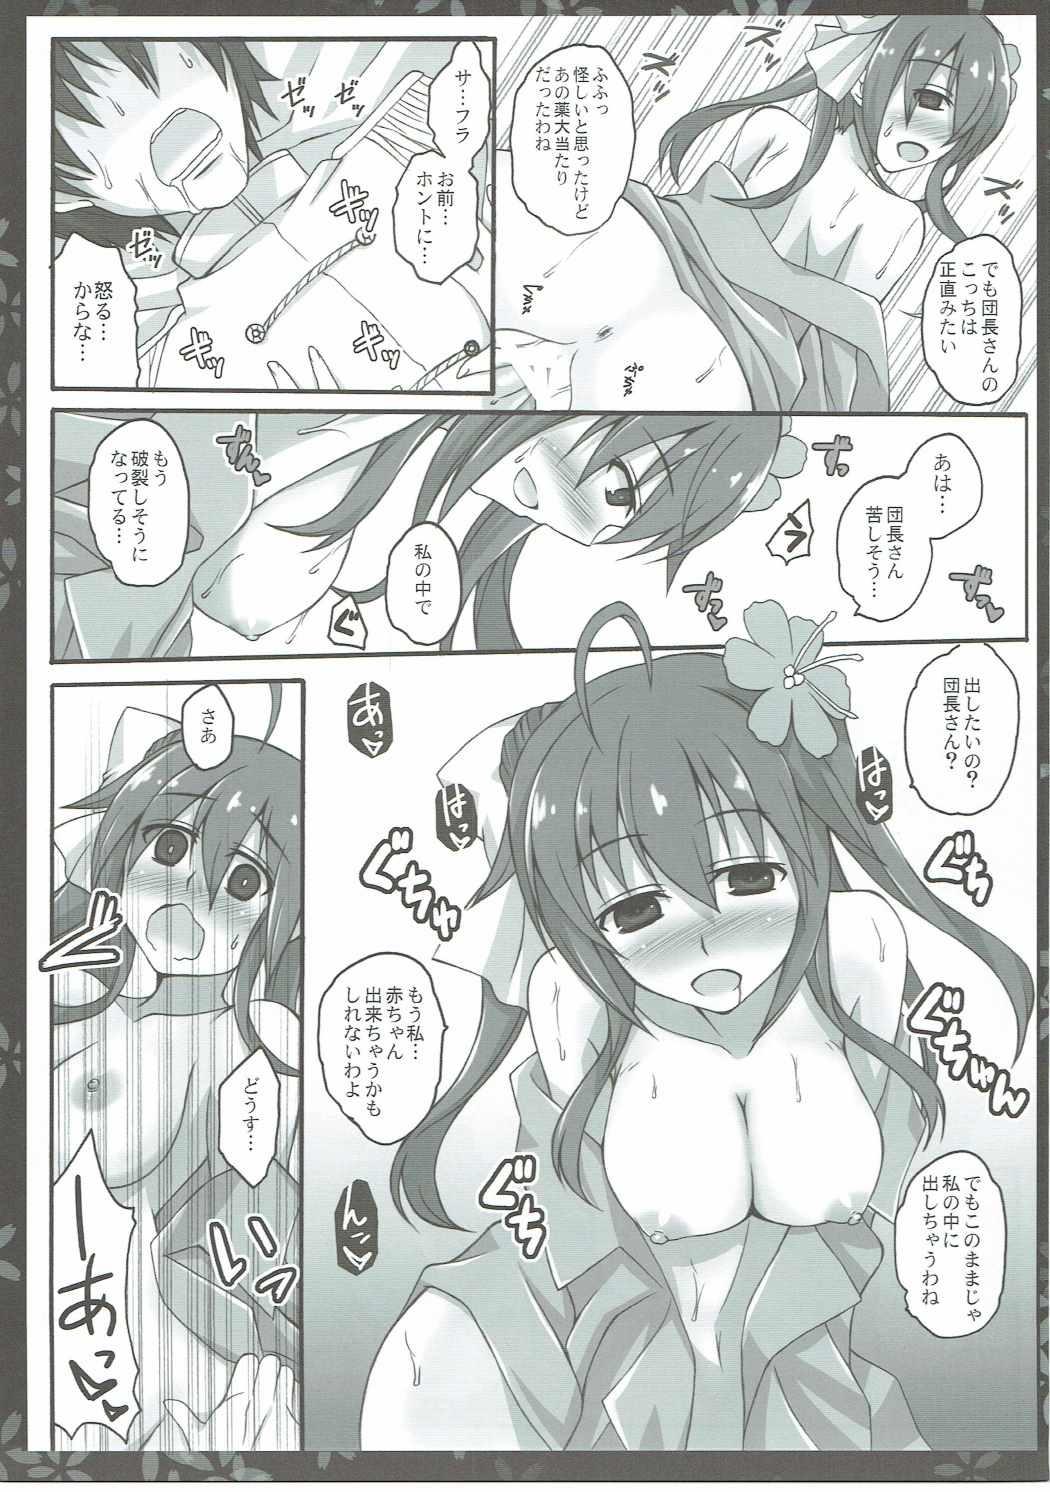 Pounded Drinking High - Flower knight girl Ametuer Porn - Page 10